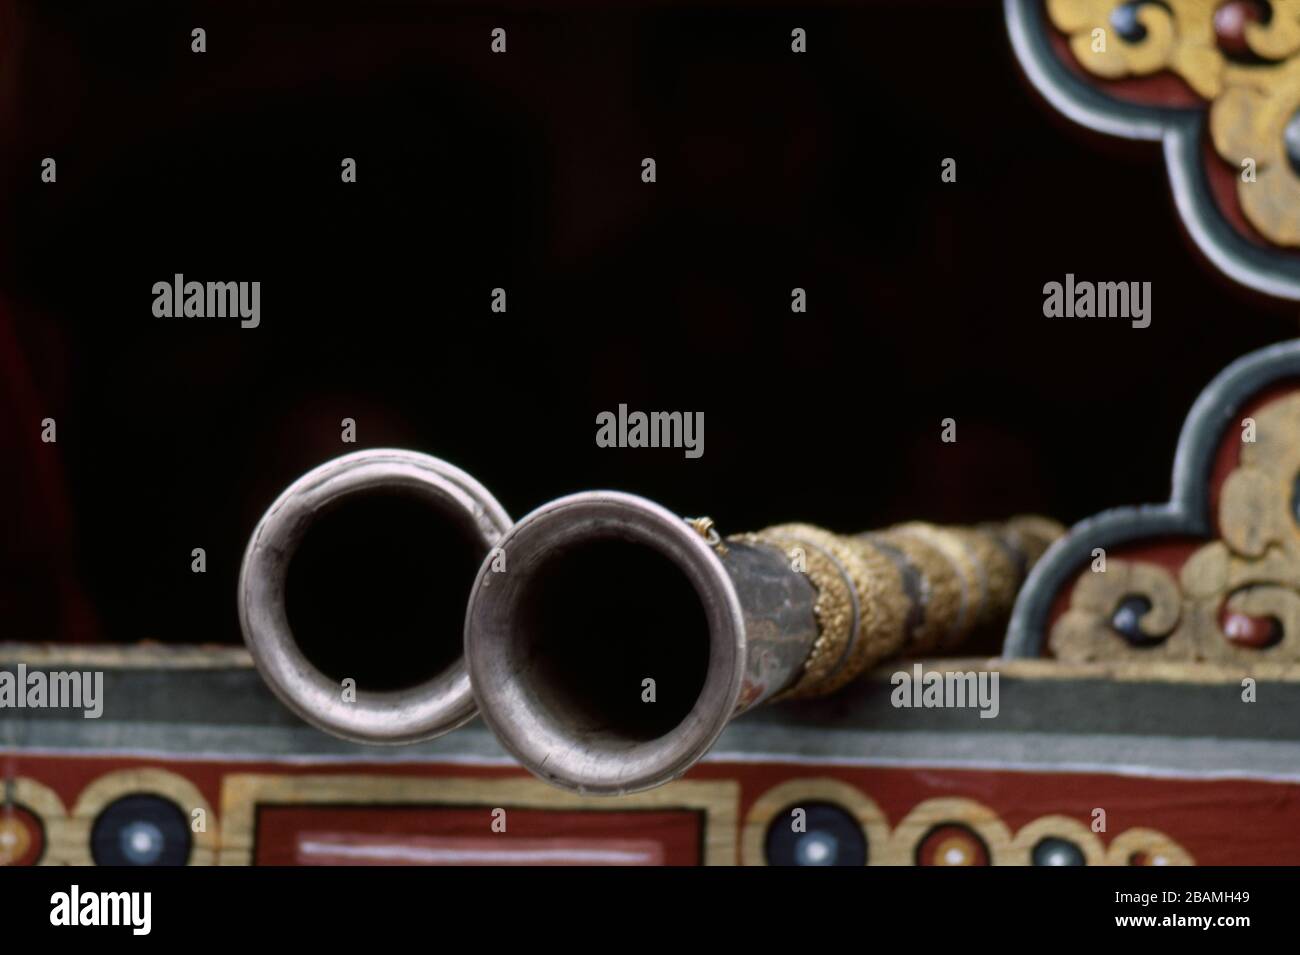 Very large and long horn trumpets resting on a railing during Bhutan's annual Thimphu Tsechu festival. (10-10-89) BX45 Stock Photo